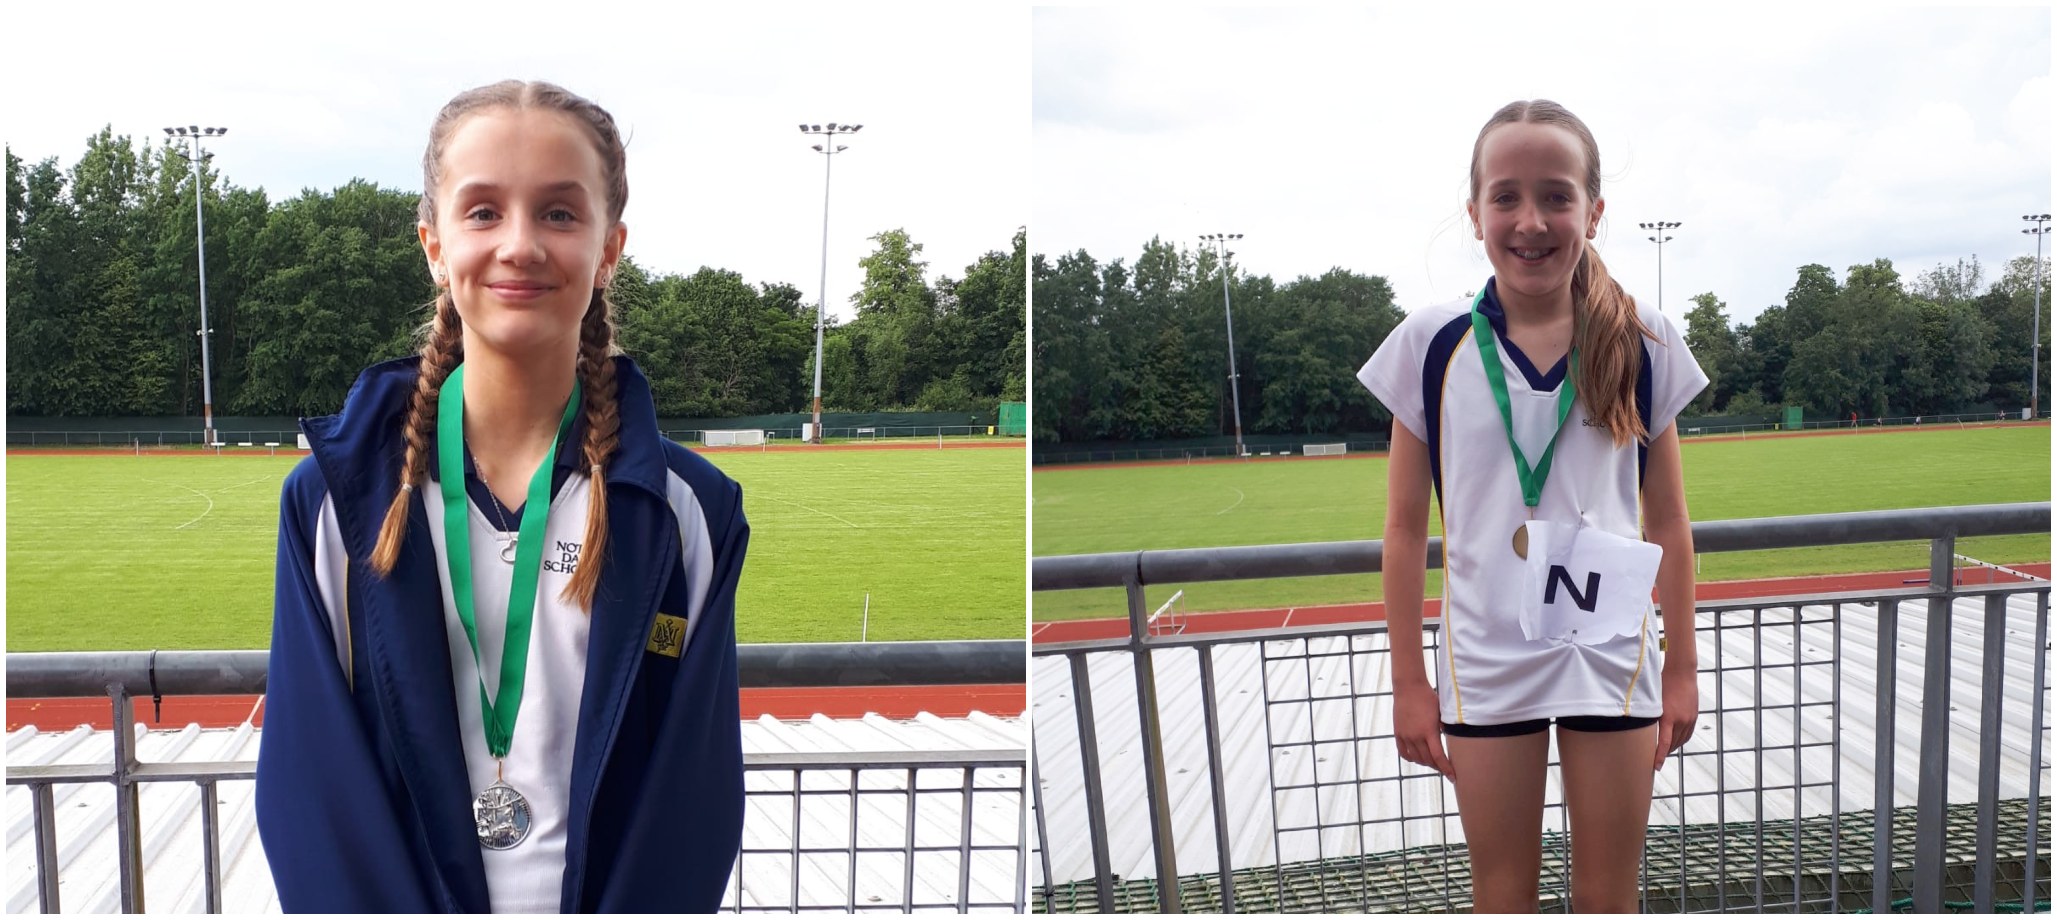 Year 7 and 8 Medalists at W Surrey Athletics Competition